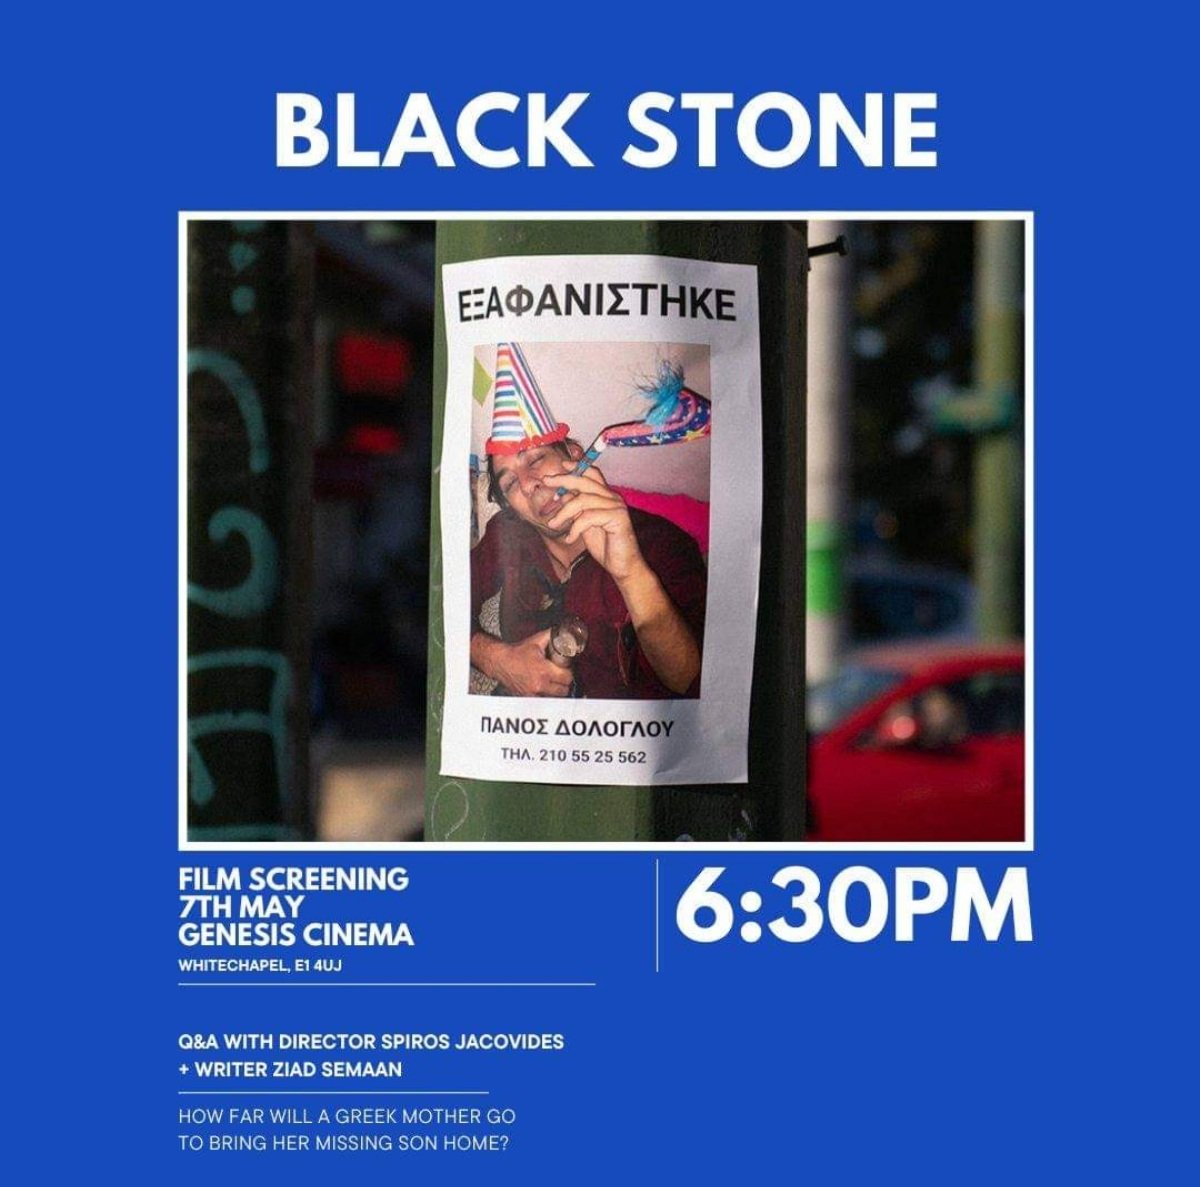 #LONDON & environs people. At a loss end this evening? 6.30PM in Whitechapel,#GenesisCinema. #BlackStone. Absurdist comedy #Greek-style. How far will a mother go to get her son back home? Q&A session with the makers & film-journalist, #StephenDalton.